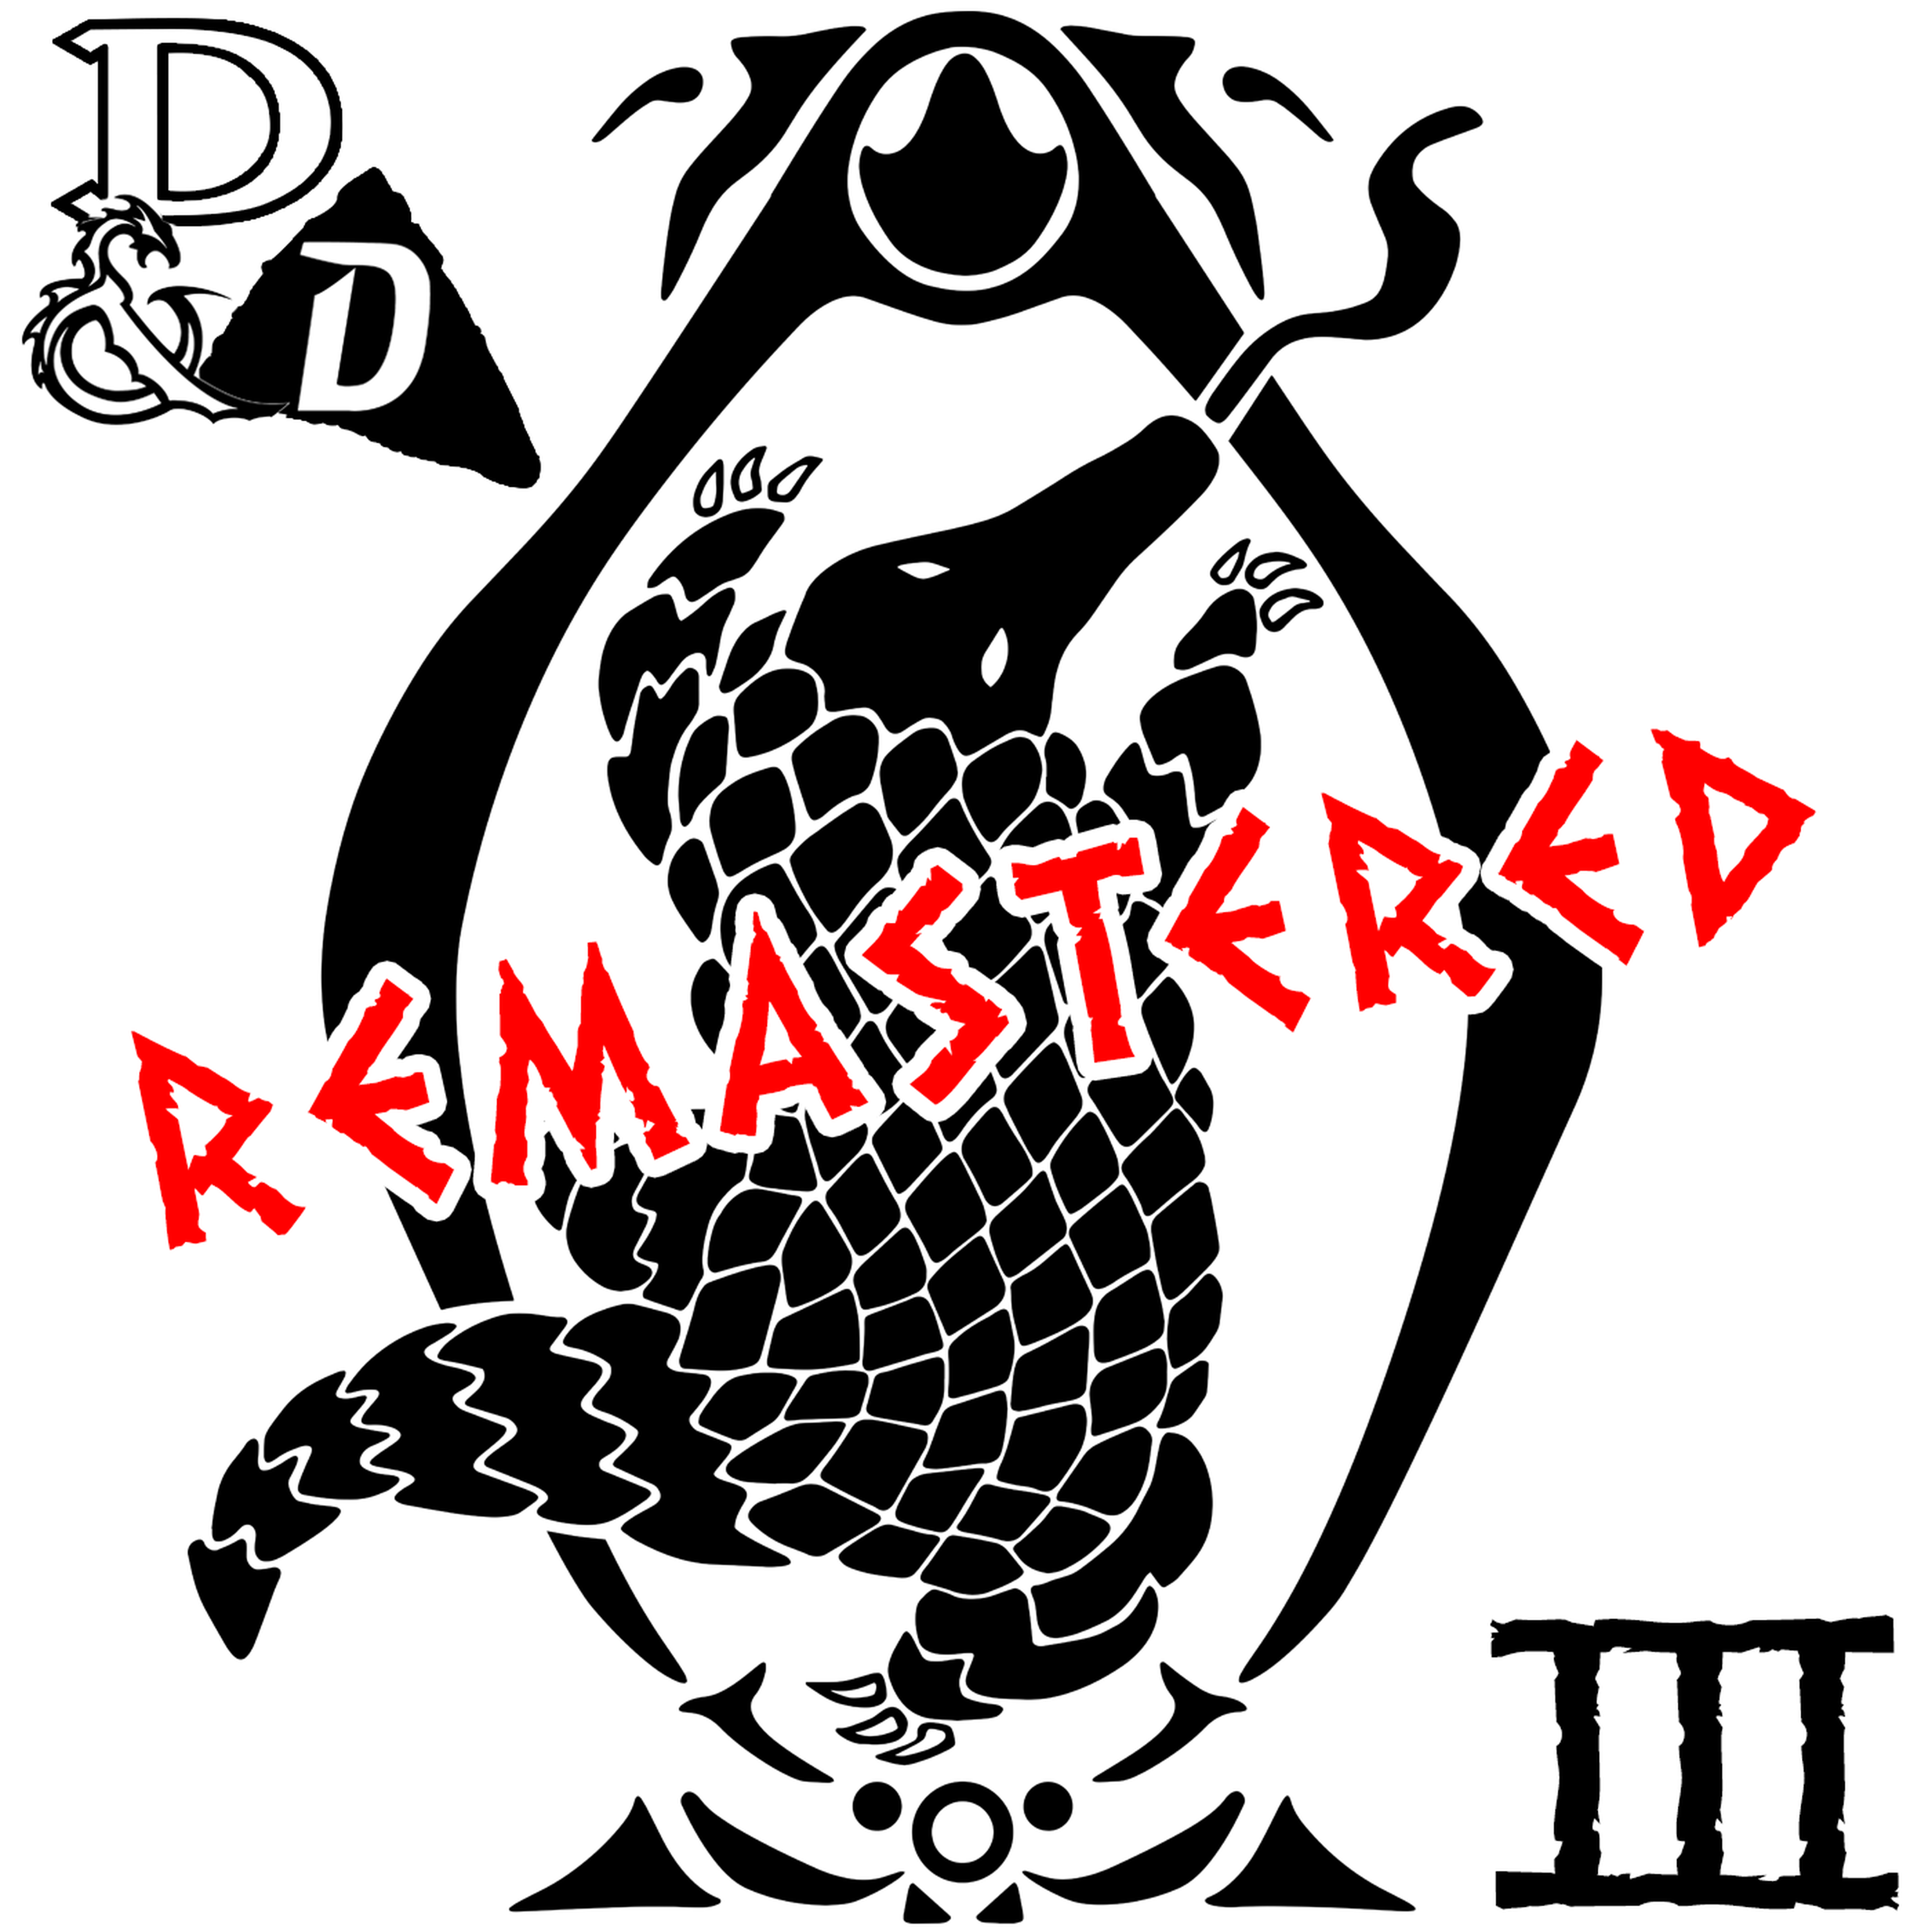 D&D Bulletin :: The Quest for the Erotic Pangolin - Remastered!